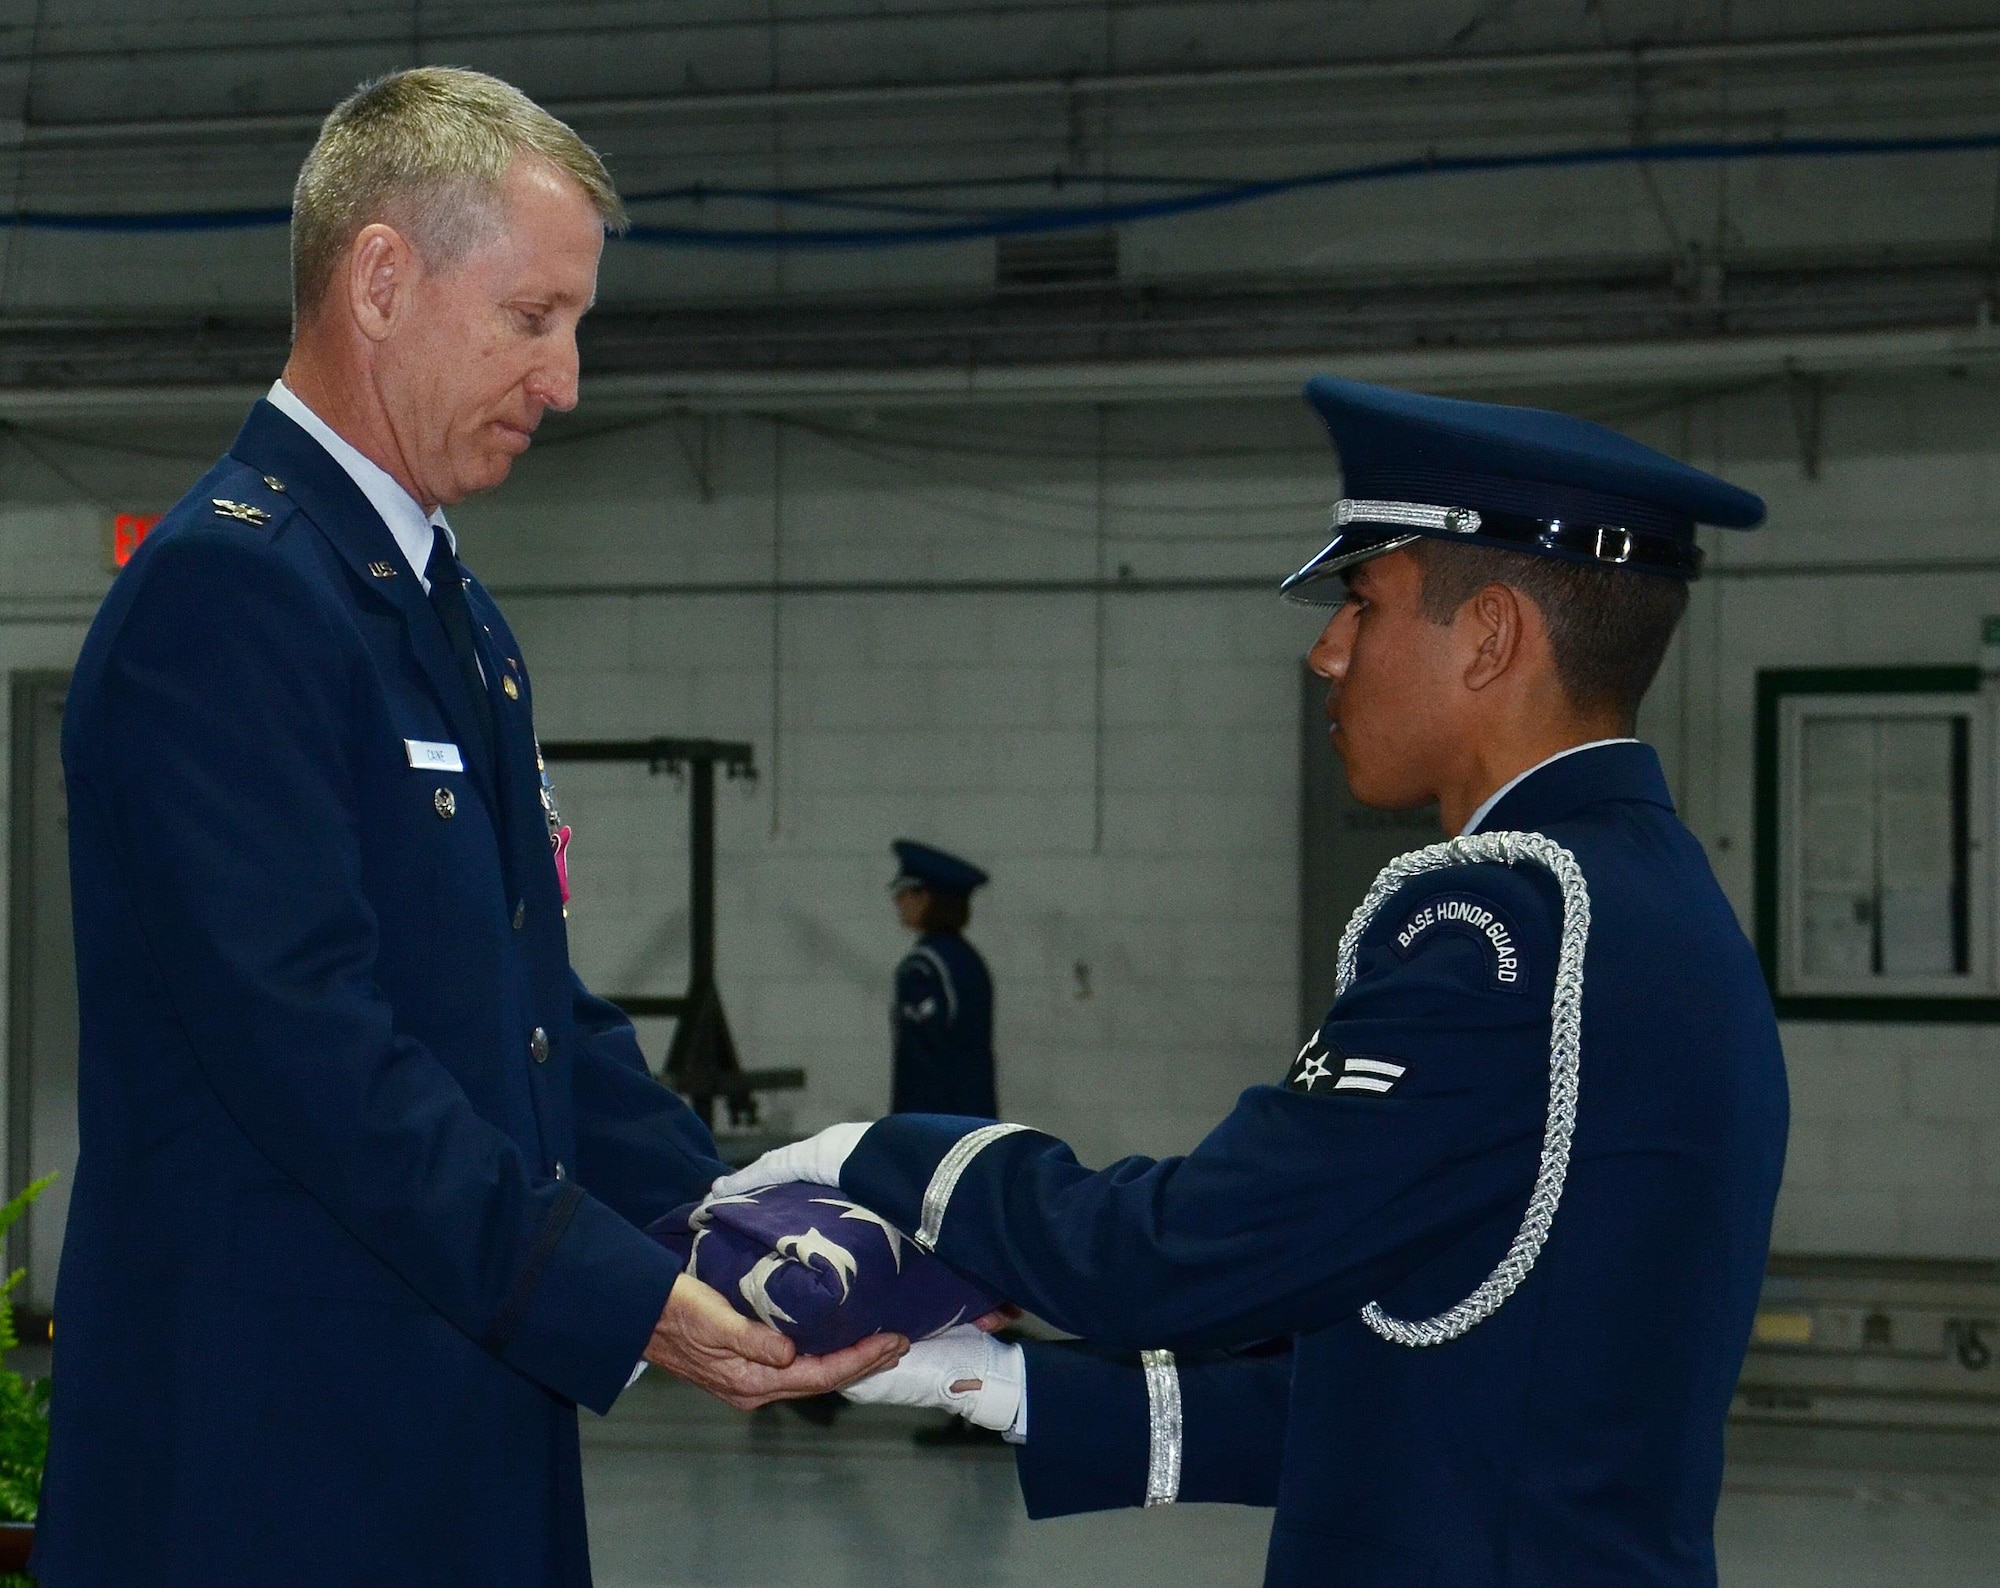 U.S. Air Force Col. Scott Caine, 9th Air Force vice commander, receives a folded American Flag from Airman 1st Class Michael De La Cruz, Shaw Air Force Base Honor Guard ceremonial guardsman, during Caine’s retirement ceremony, Shaw AFB, S.C., Feb. 10, 2017. As part of the ceremony, the American Flag was displayed and refolded to show respect and gratitude toward those who have fought and continue to fight for freedom. (U.S. Air Force photo by Tech. Sgt. Amanda Dick)